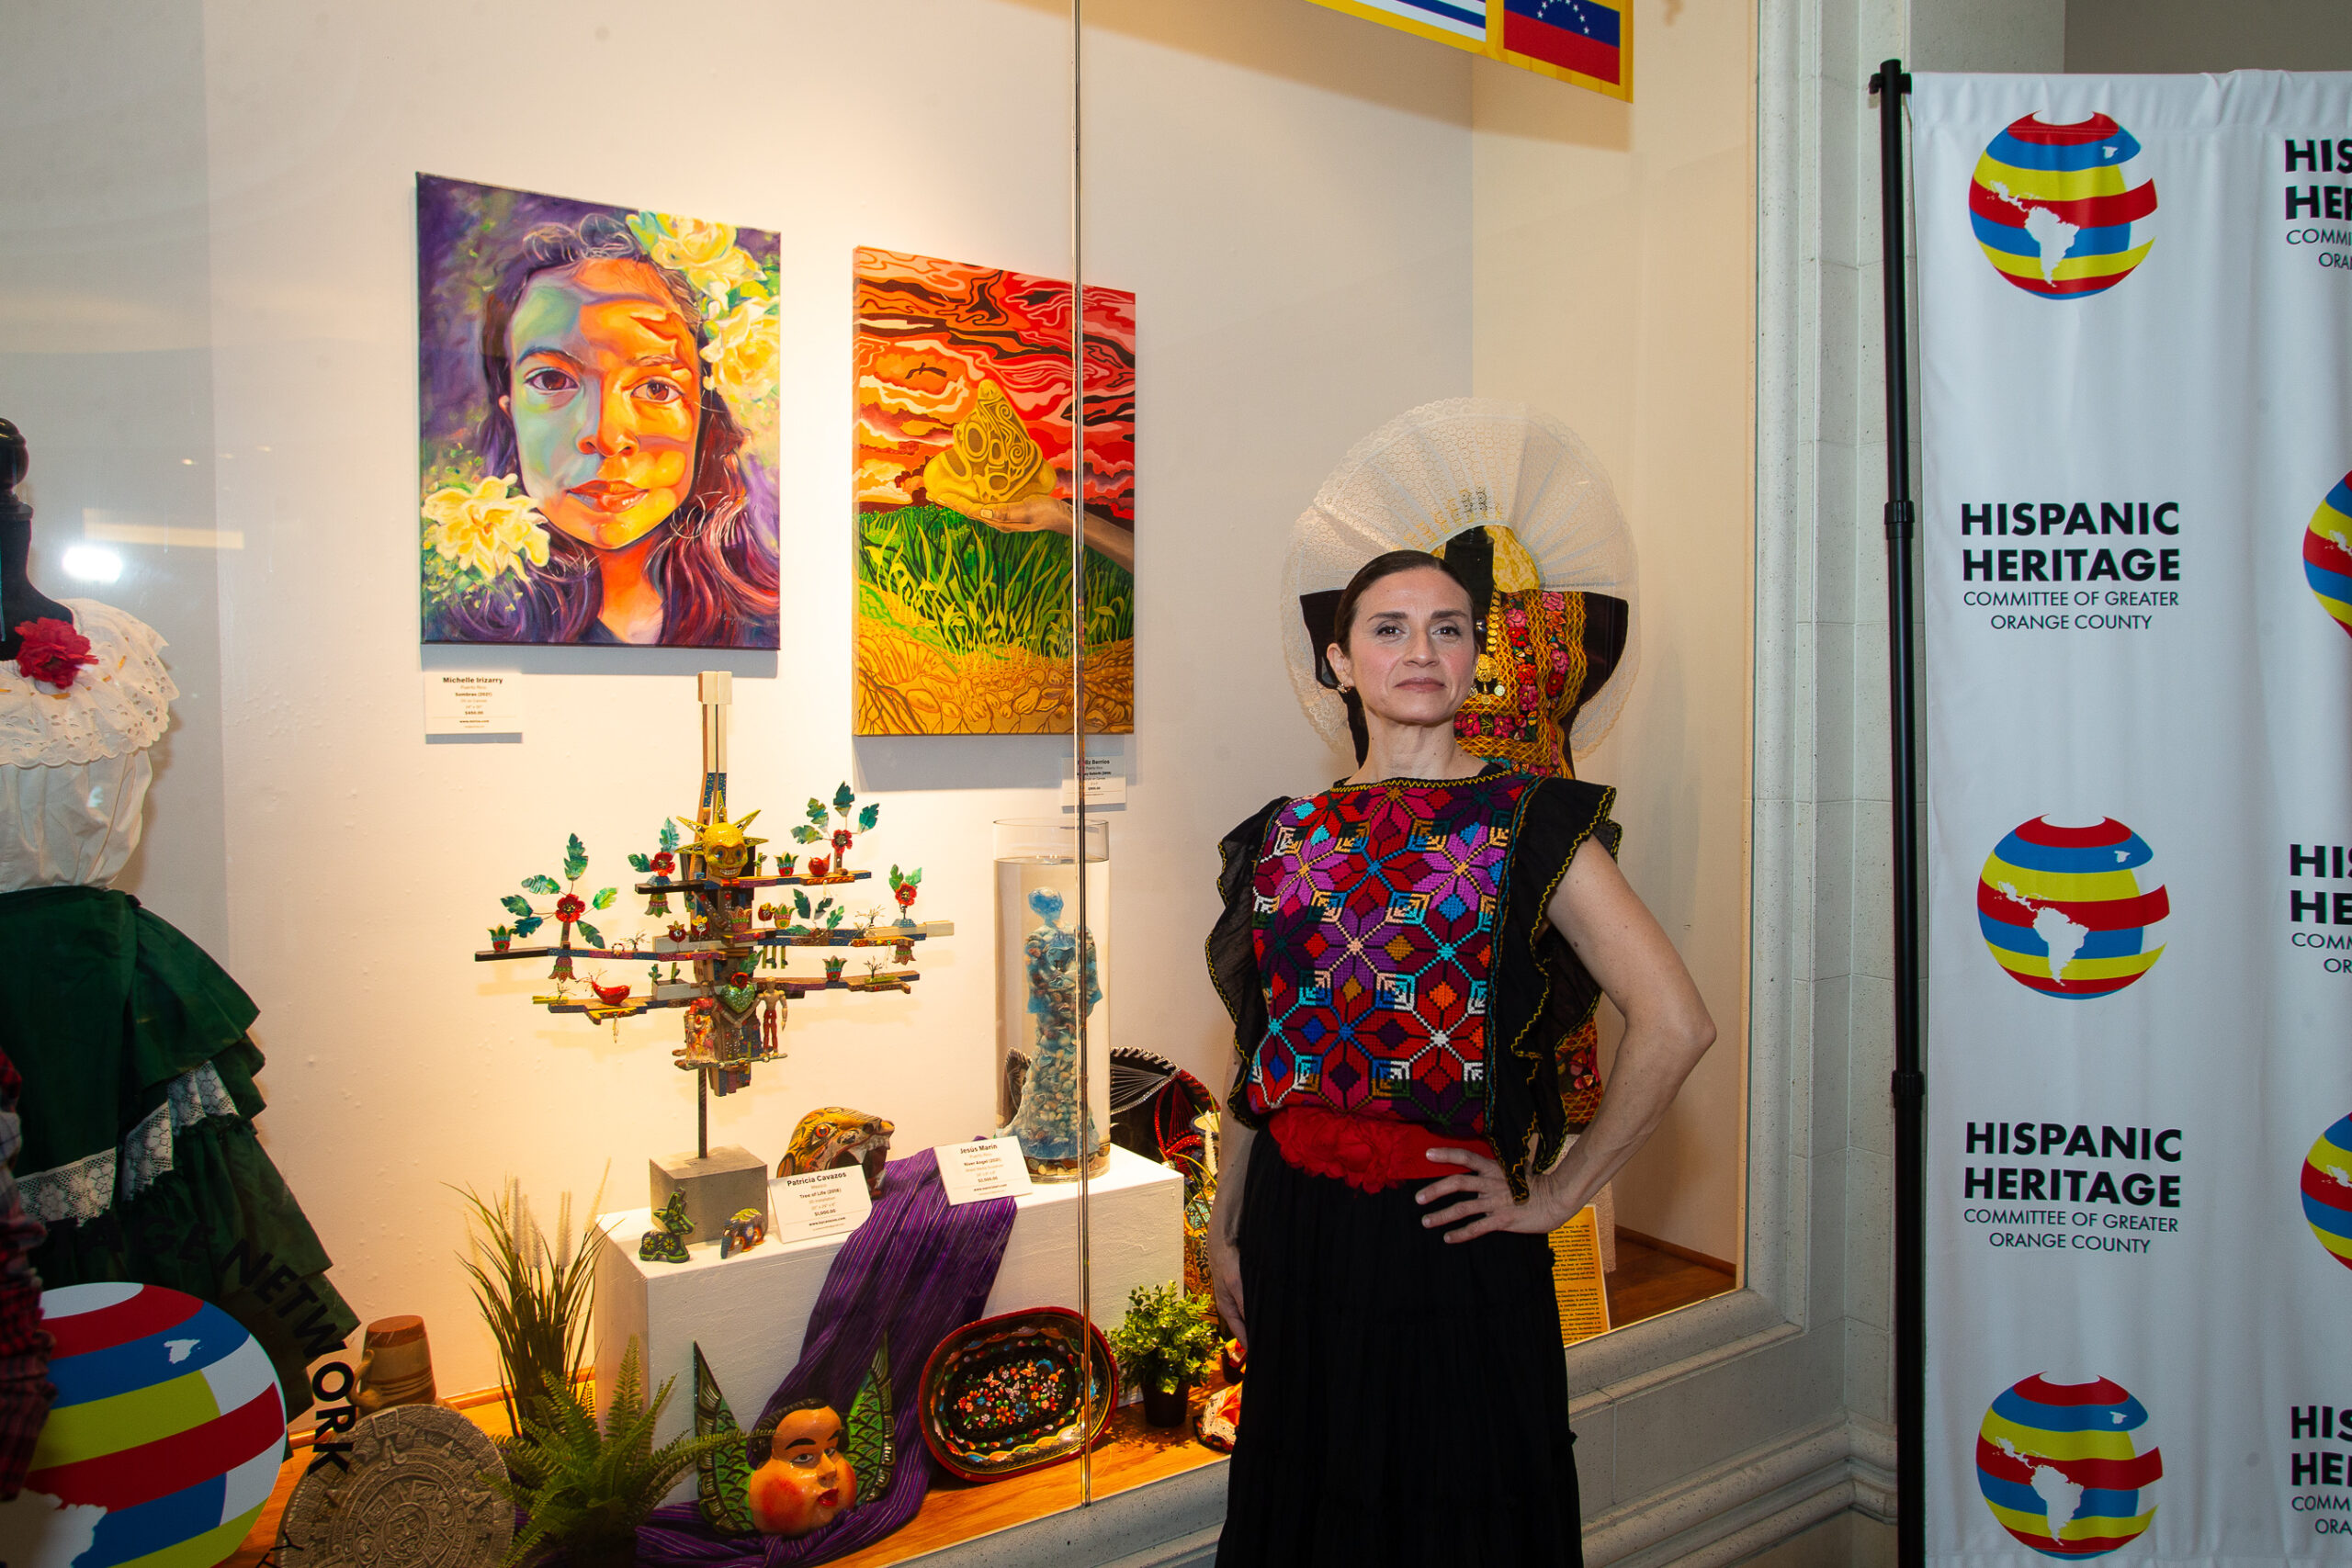 In celebration of Hispanic Heritage Month, a new art exhibit was unveiled on September 19, 2022 at the Mall of Millenia featuring colorful artwork and festive traditional dresses from several Hispanic countries.